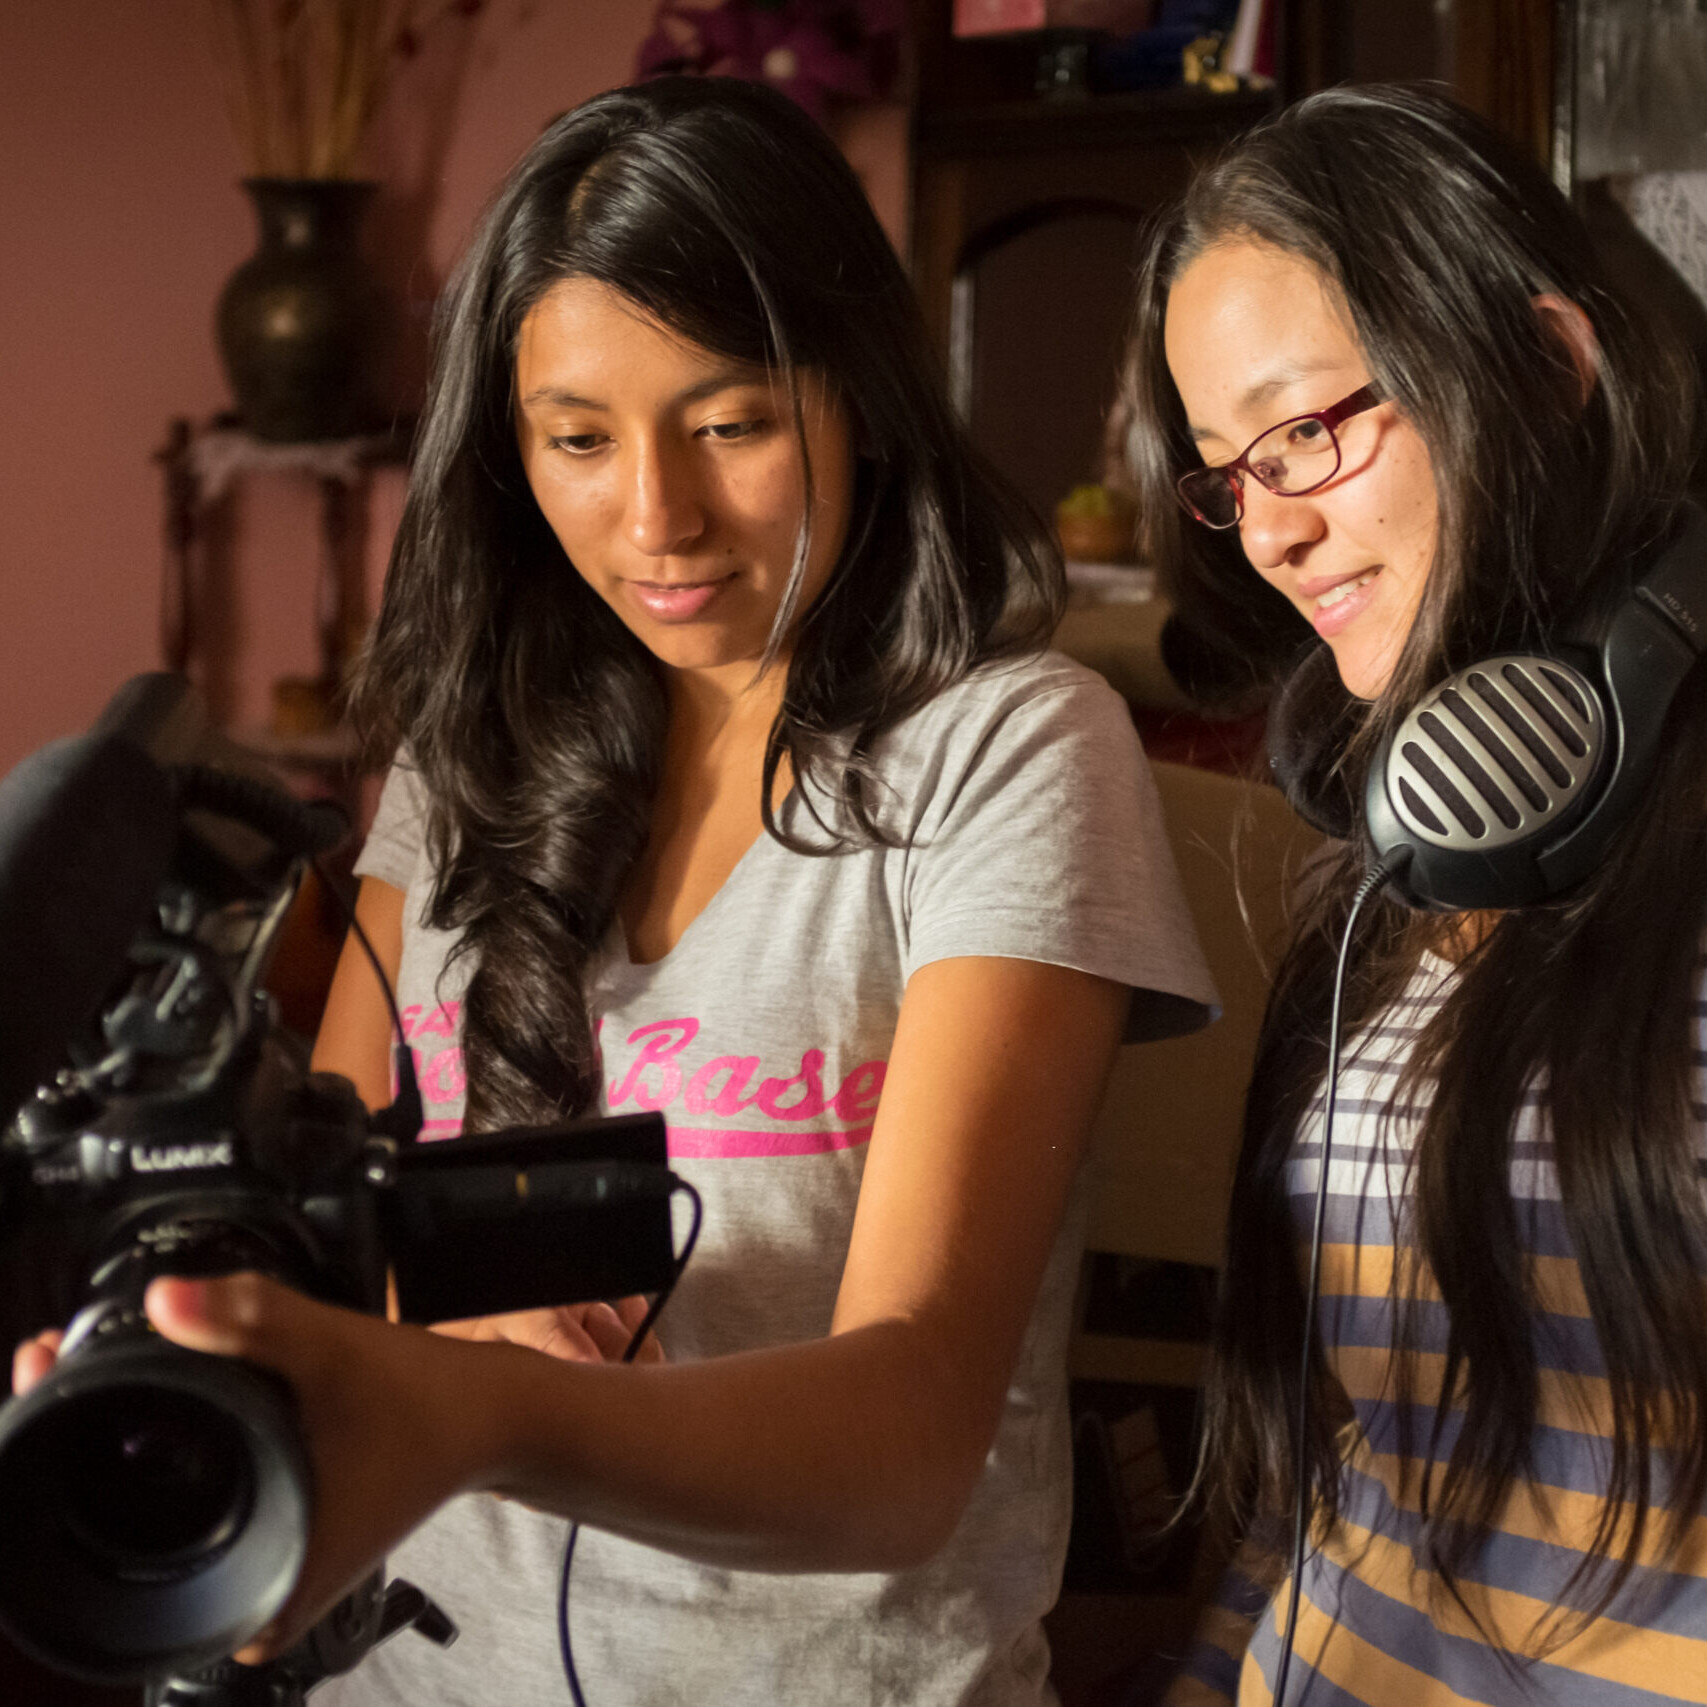 Two women standing examining a camera